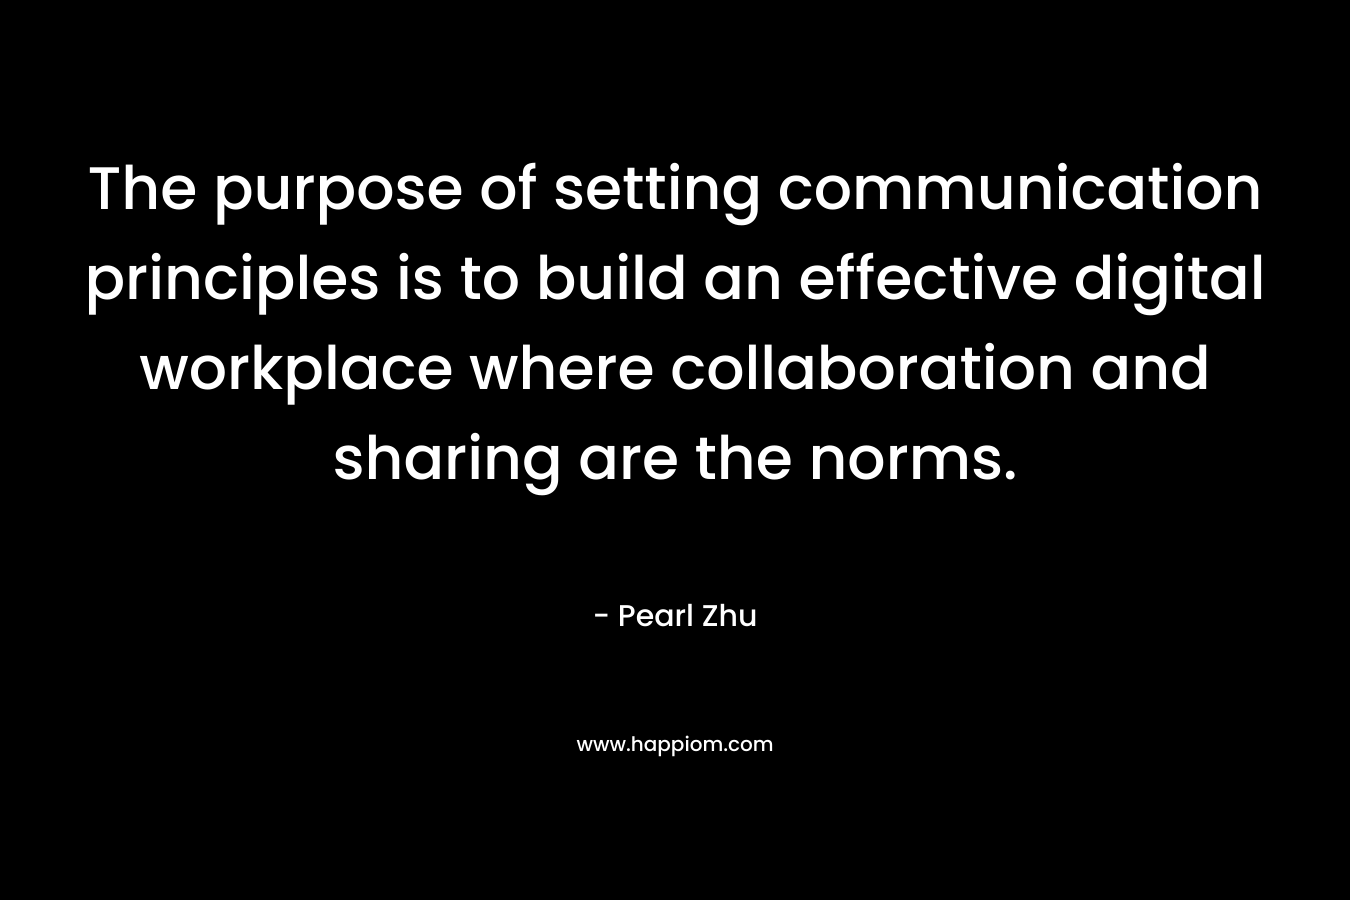 The purpose of setting communication principles is to build an effective digital workplace where collaboration and sharing are the norms.